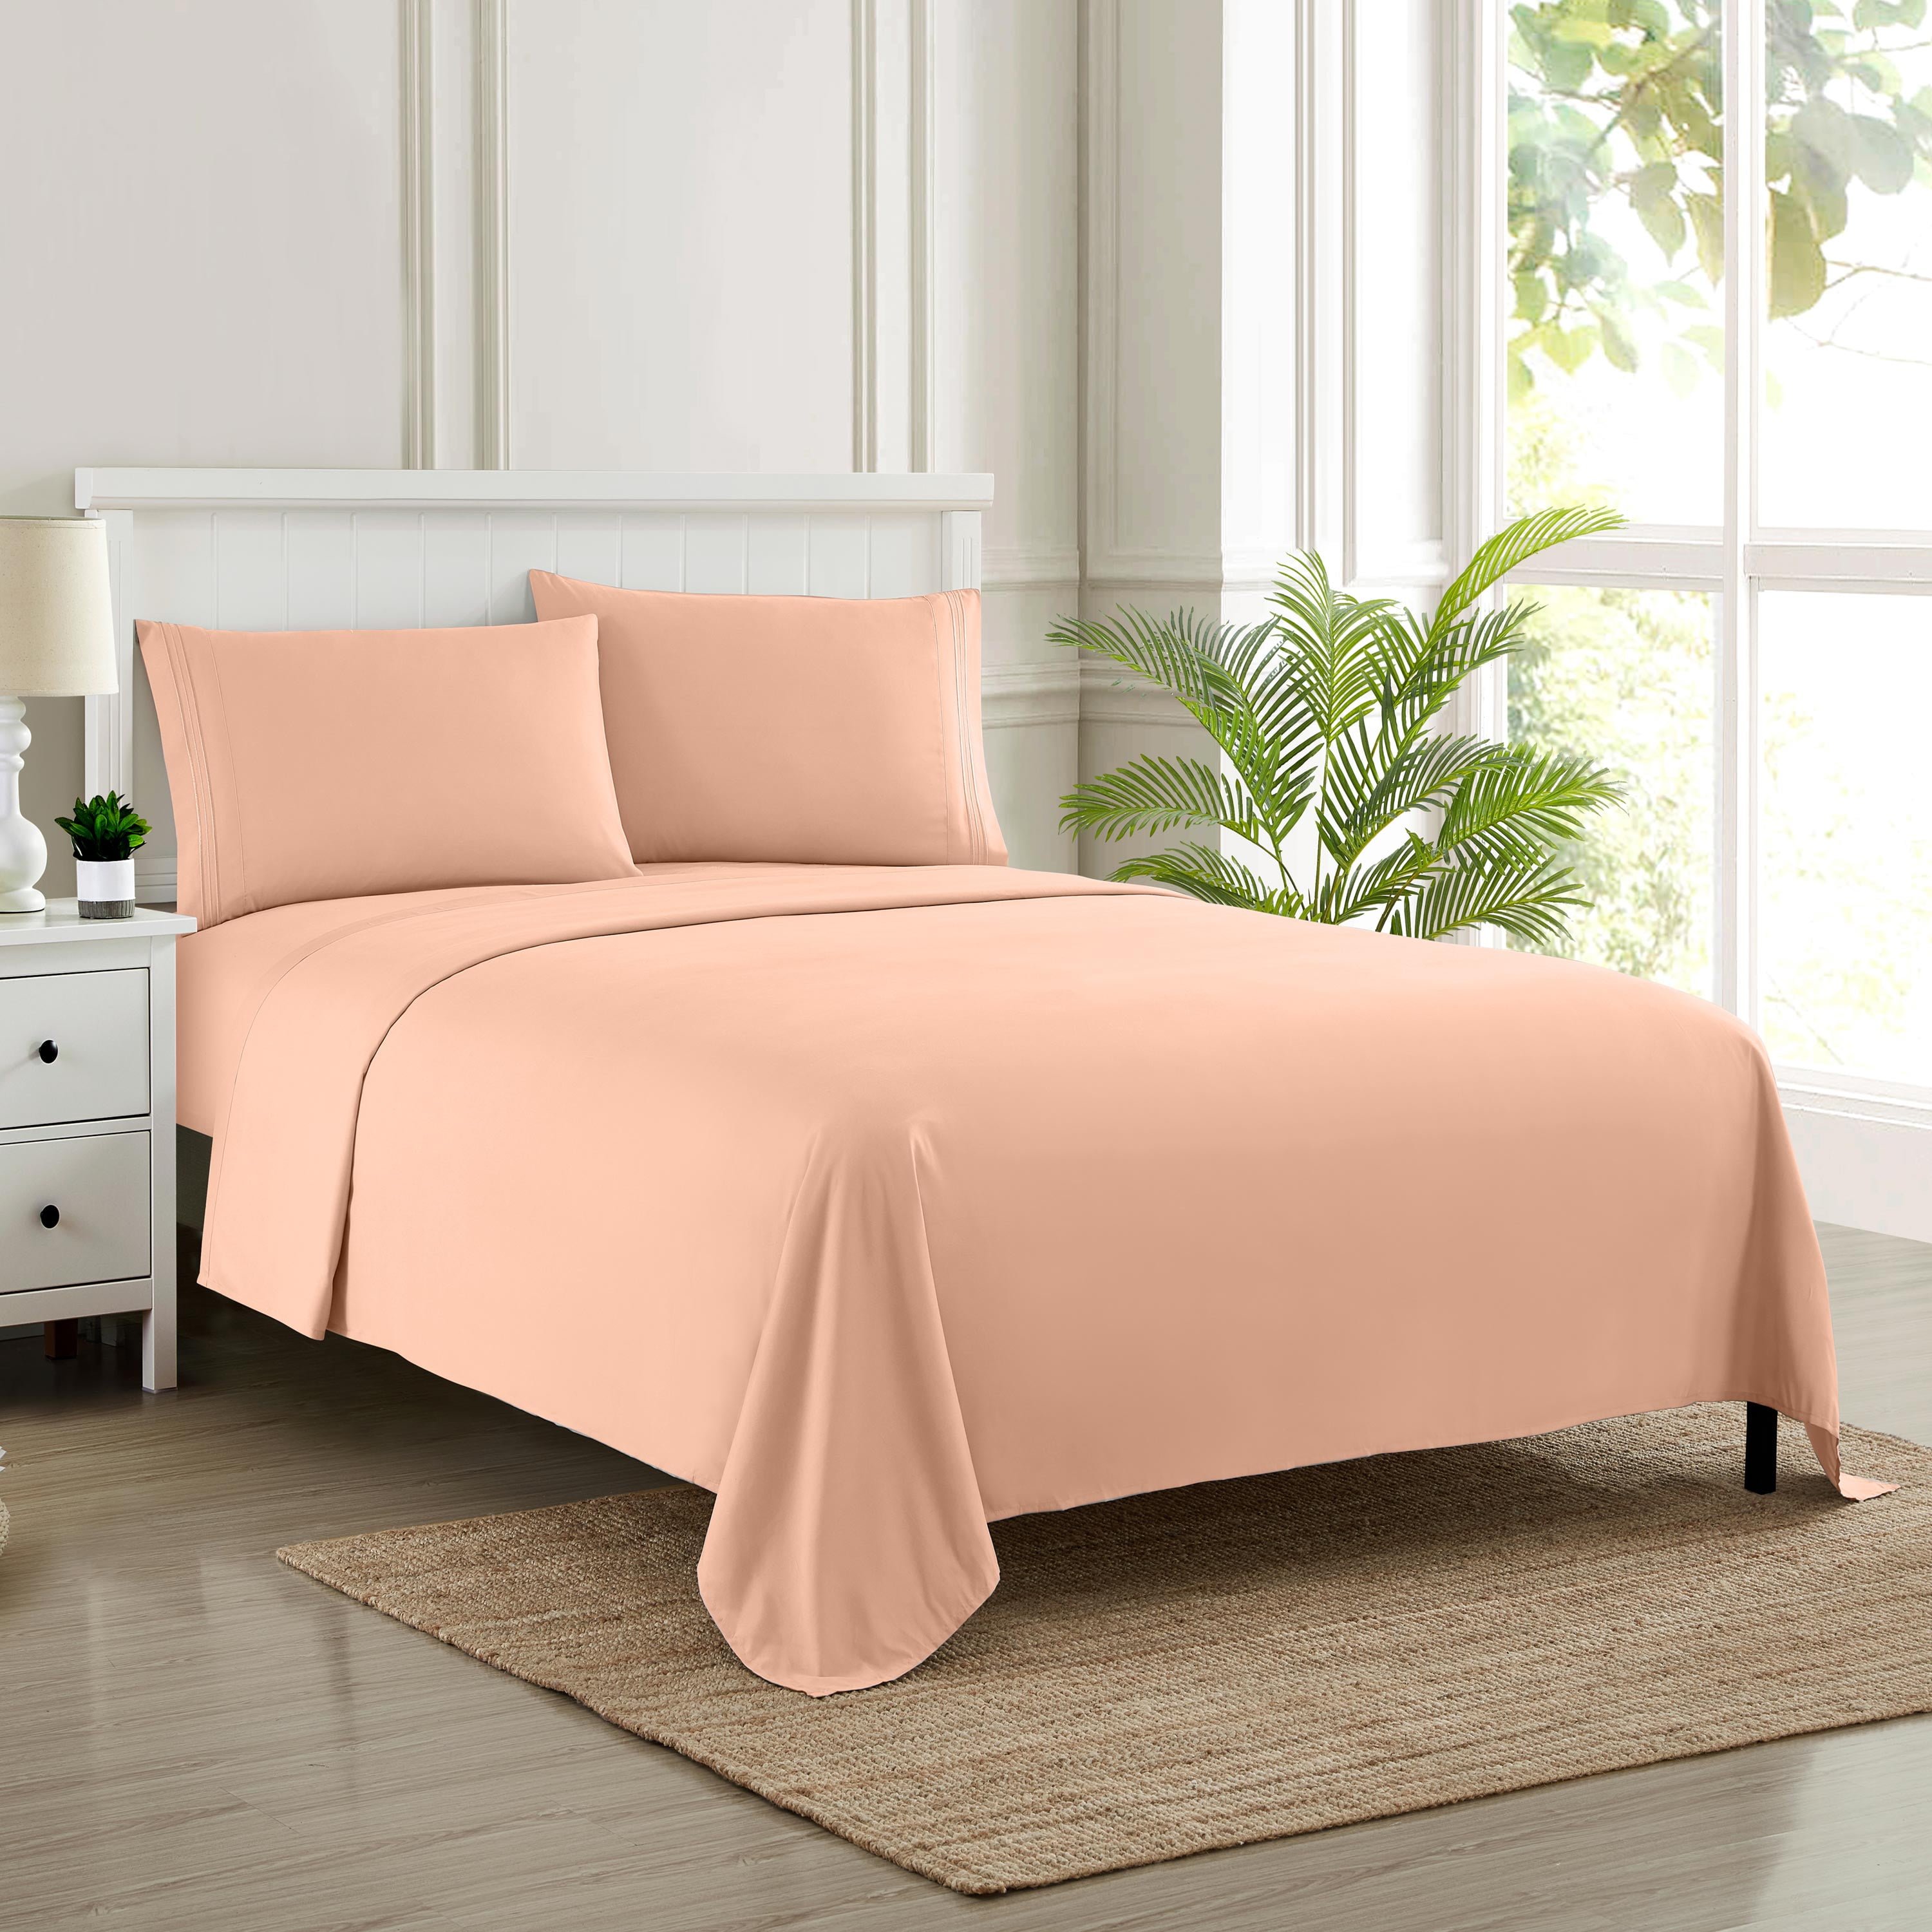 NTBAY 1800 Thread Count Microfiber Bed Sheet Set